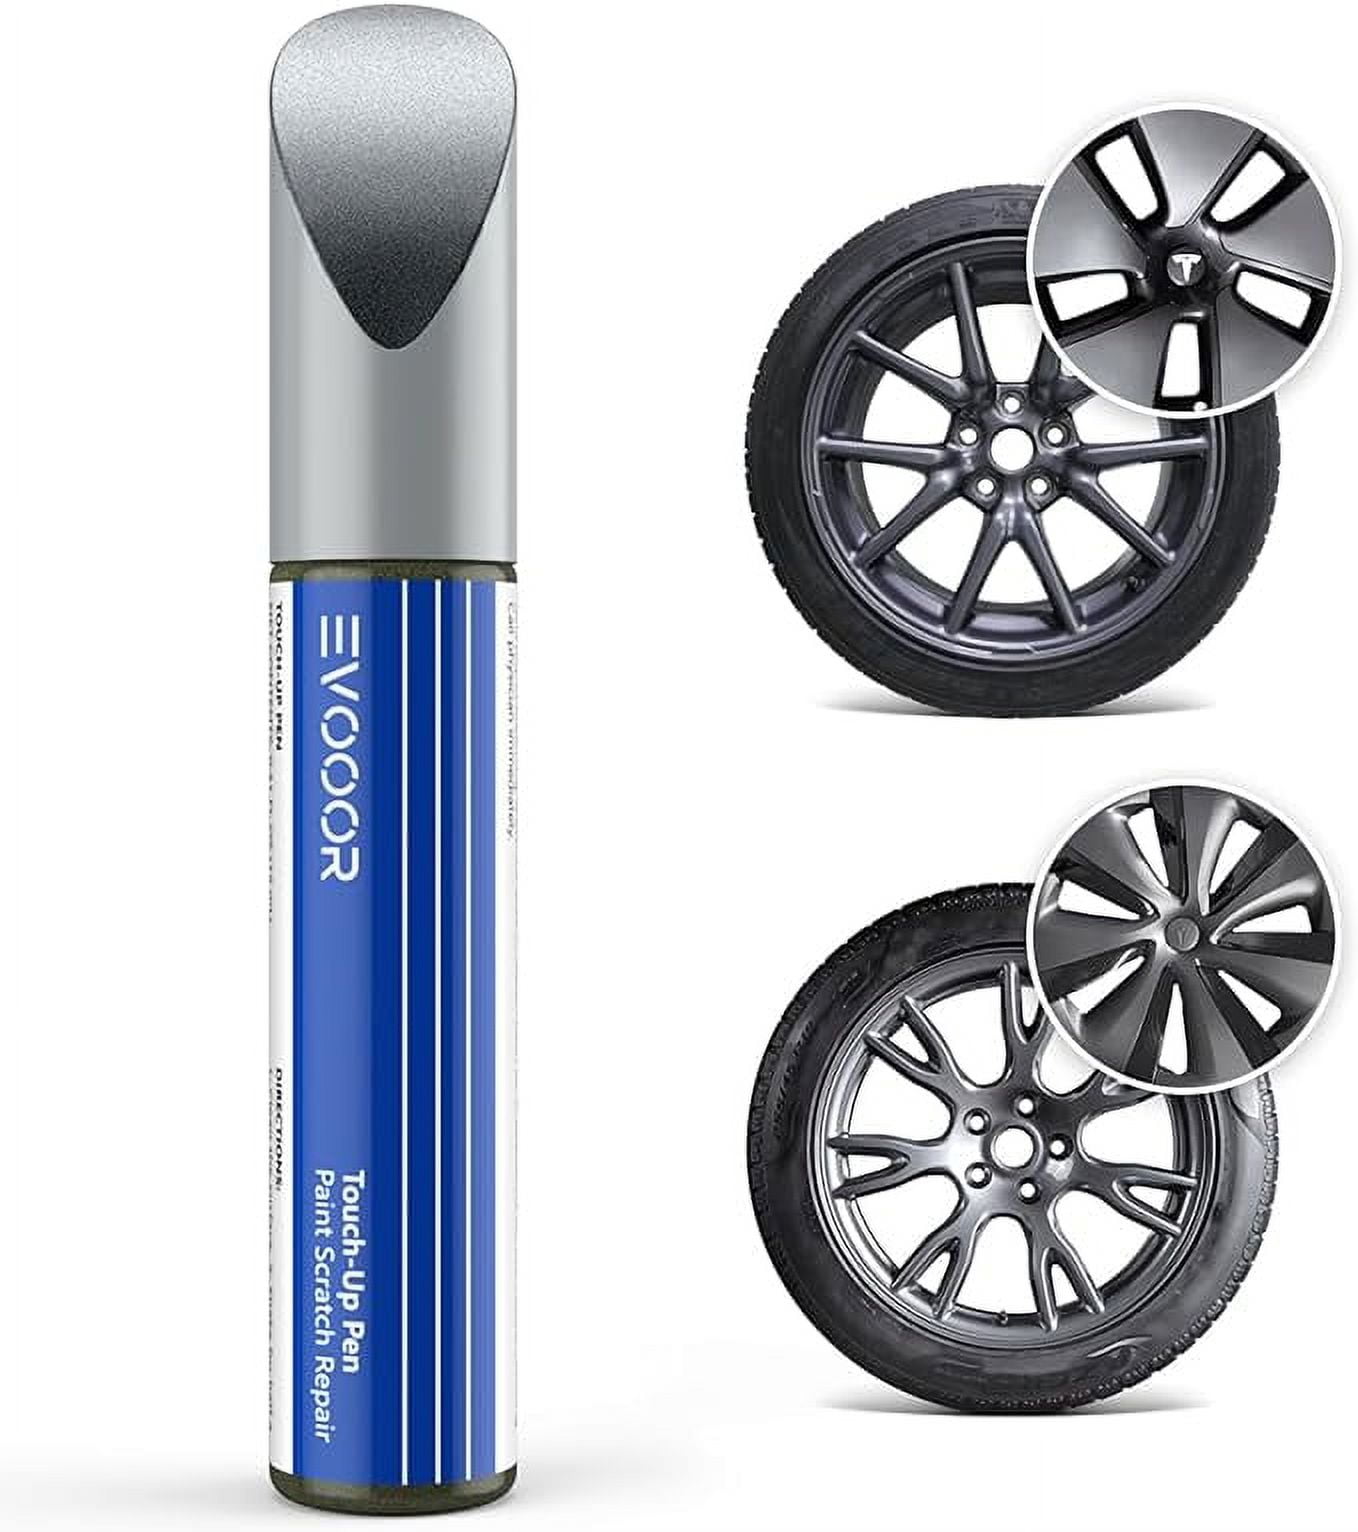 Wheel Scratch Fix Products: Find the Best Prices and Reviews